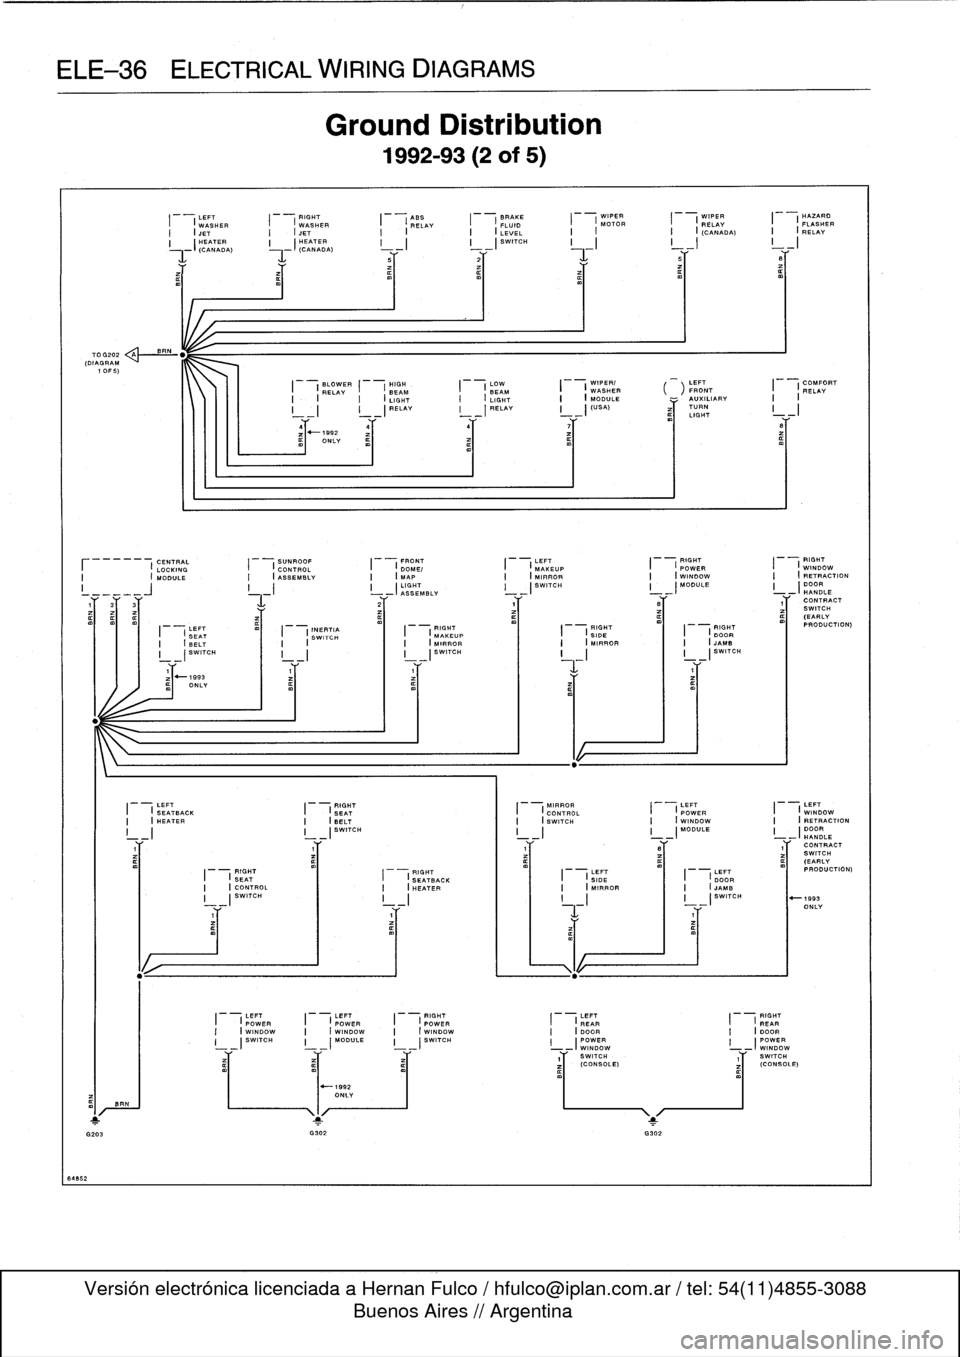 BMW 328i 1997 E36 Owners Guide 
ELE-36
ELECTRICAL
WIRING
DIAGRAMS

64852

70G202
(DIAGRAM
1
OF
5)

BR

BRN

LEFT

	

RIGHT

	

ASS

	

BRAKE

	

WIPER

	

WIPER

	

HAZARD
I

	

(
WASHER

	

I

	

(
WASHER

	

I

	

(
RELAY

	

I

